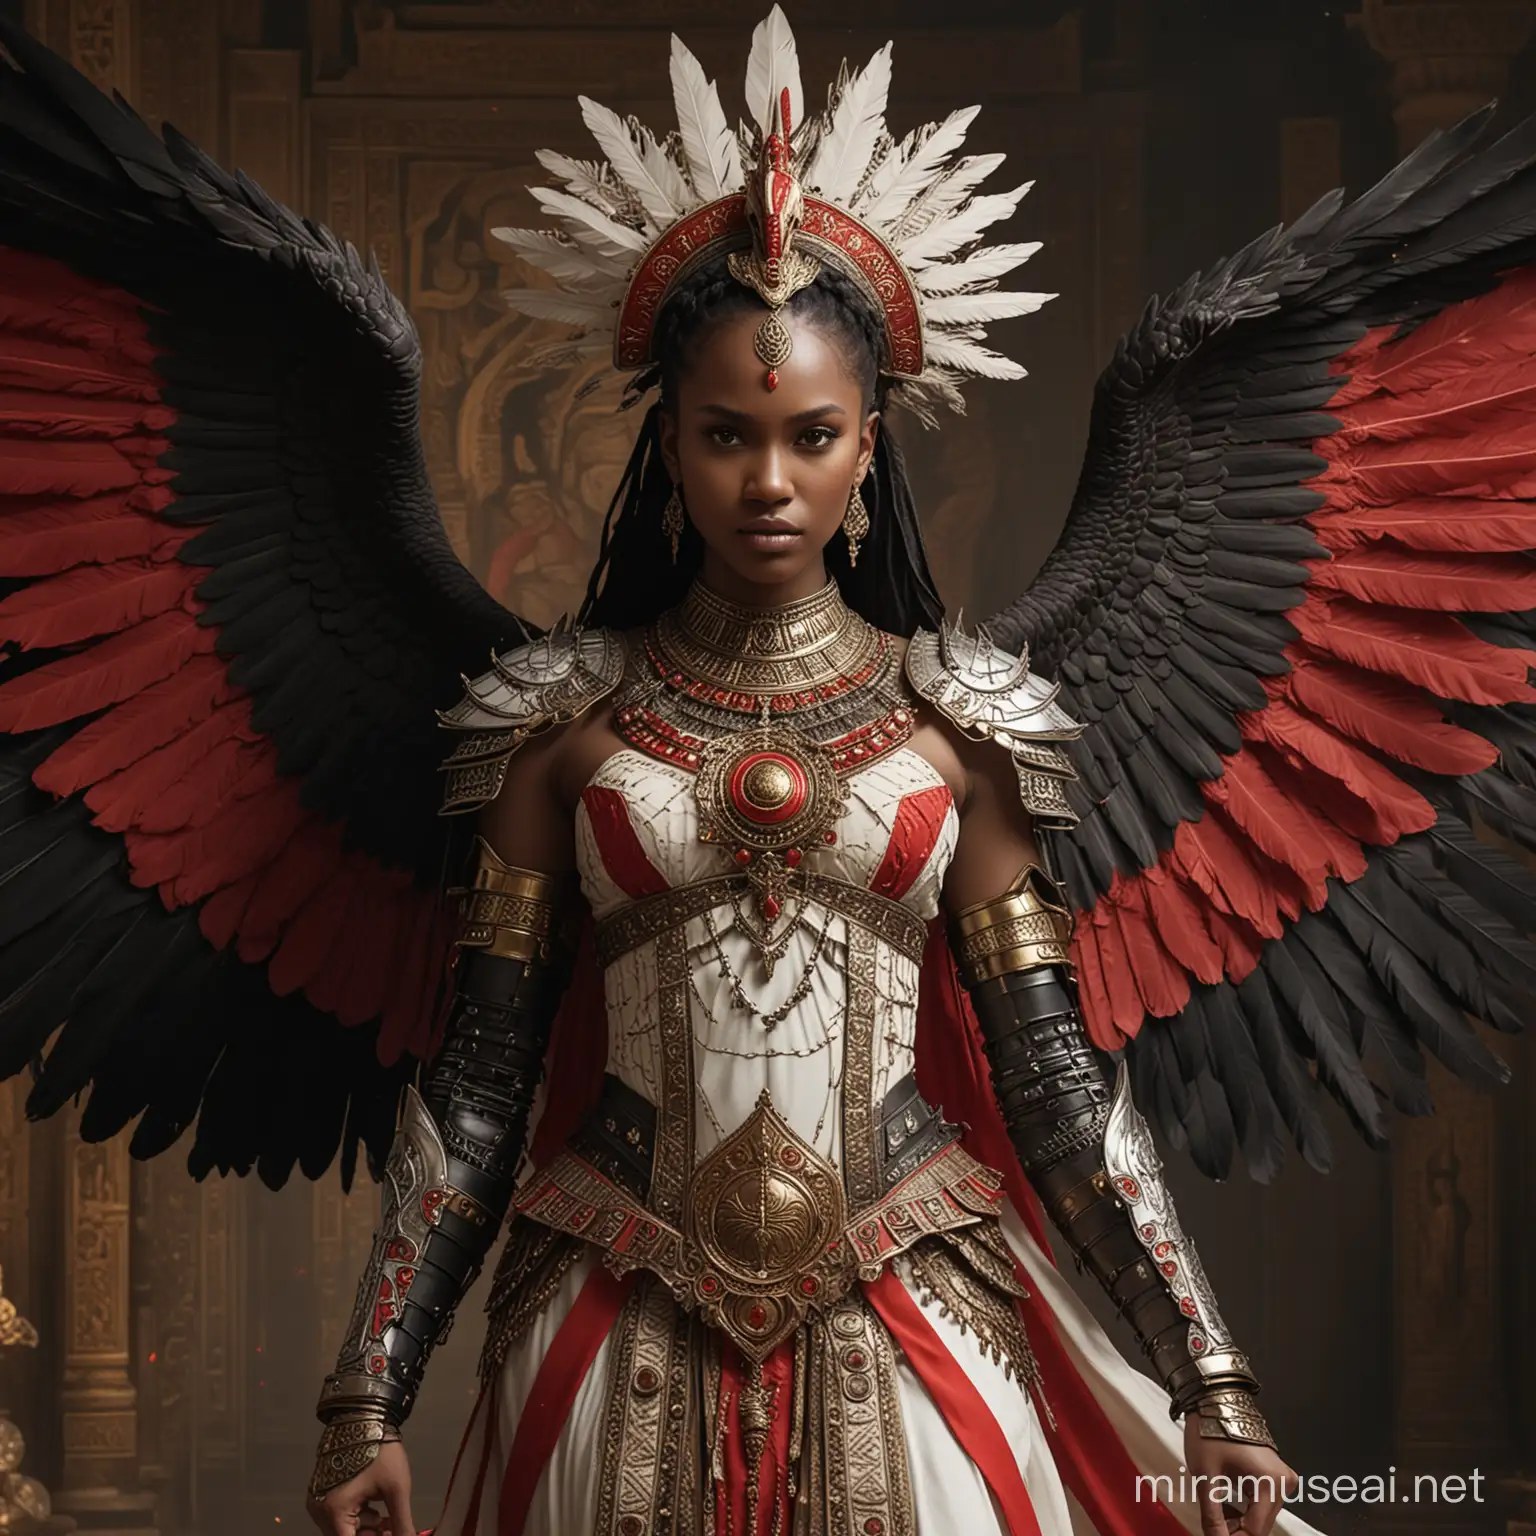 [the entire body] An african princess crowned queen of egypt with red and white wings, fierce in a dress like a warrior's armor, her dark black hair with a hint of blonde flowing on the side of her face and shoulders, a majestic robotic Garuda with red and white cloth ruffles, the background of the ancient Javanese Majapahit kingdom, hyper-realistic, finely detailed with intricate colors, uhd 128k